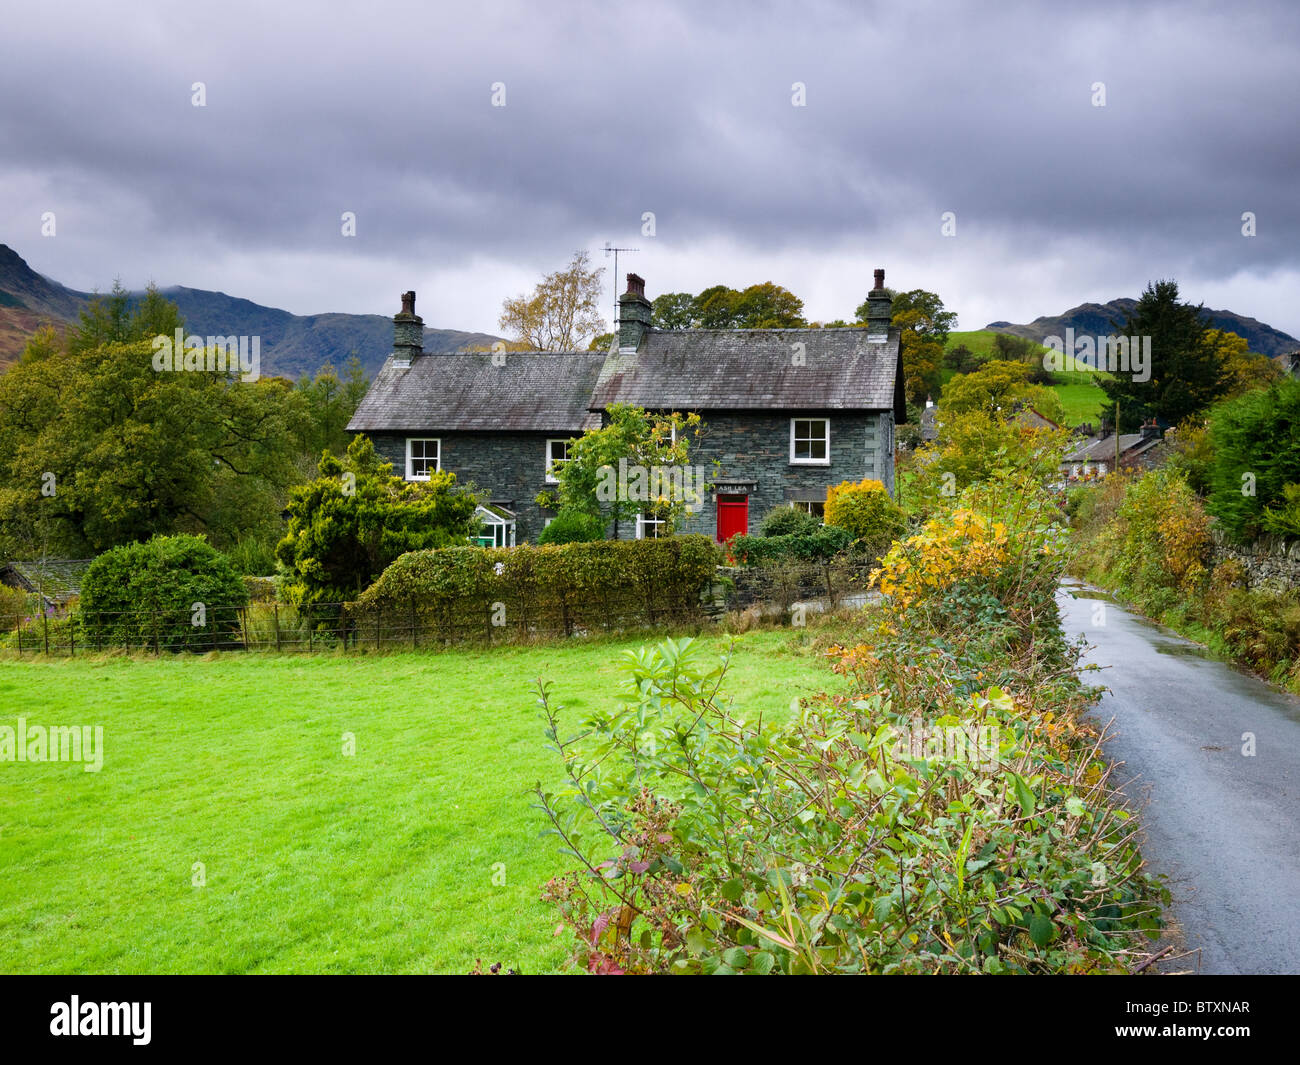 The hamlet of Little Langdale in the Lake District National Park, Cumbria, England. Stock Photo